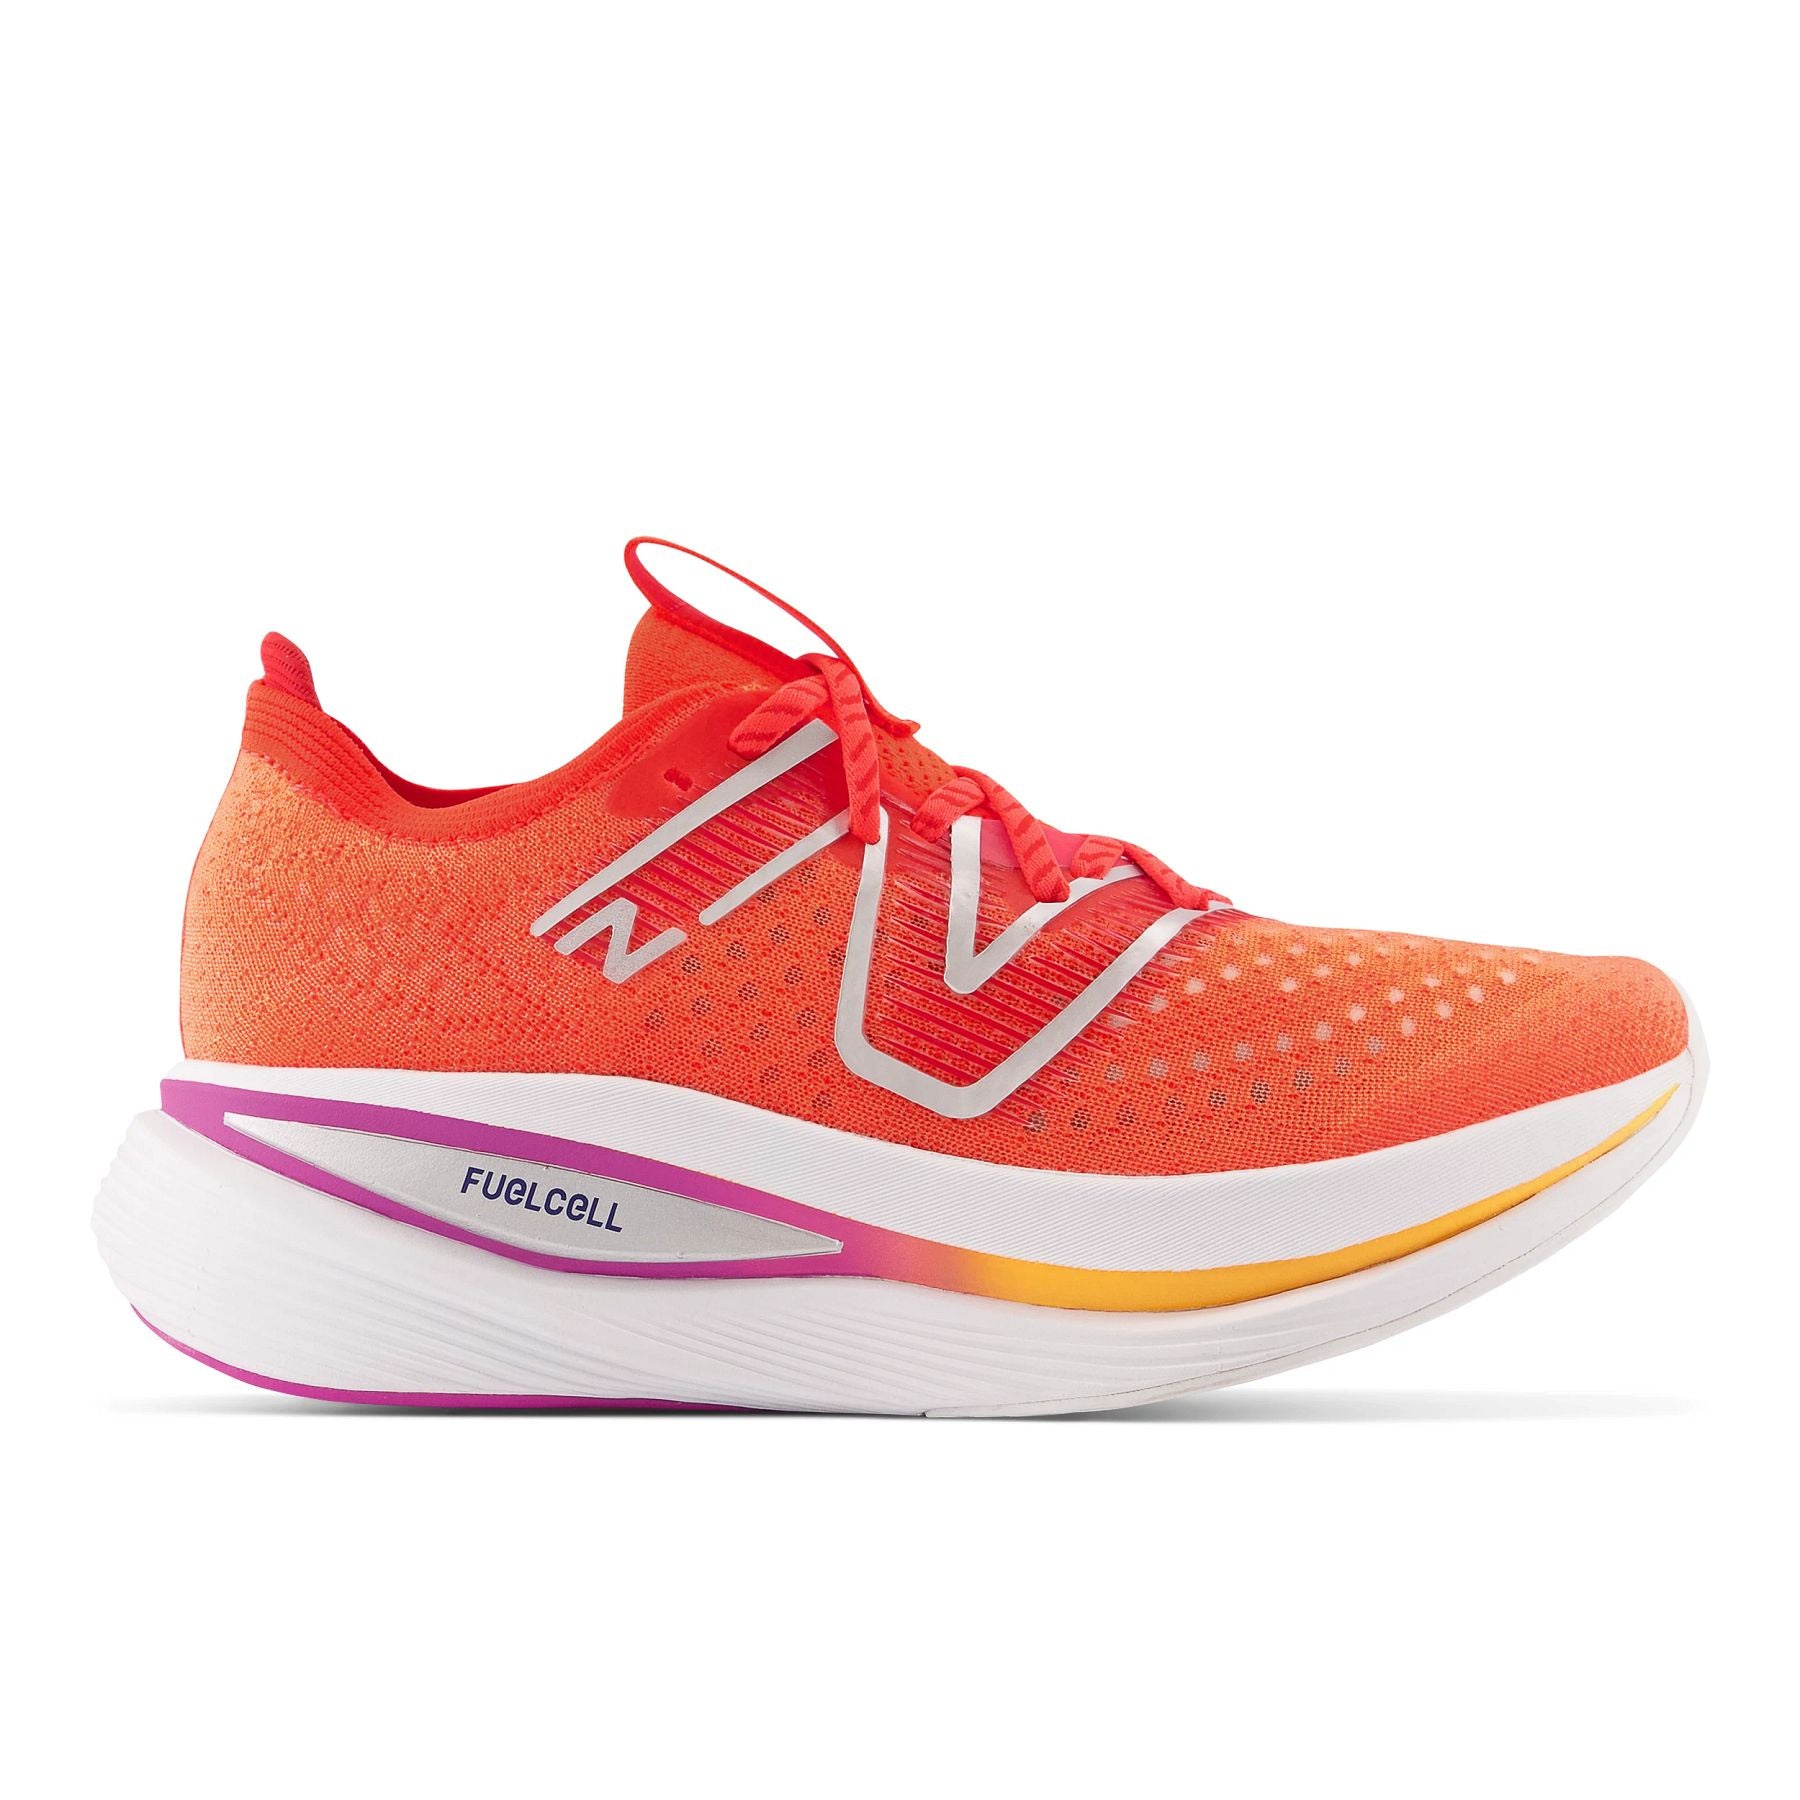 Lateral view of the Women's Fuel Cell Supercomp Trainer by New Balance in the color Electric Red/Silver Metallic